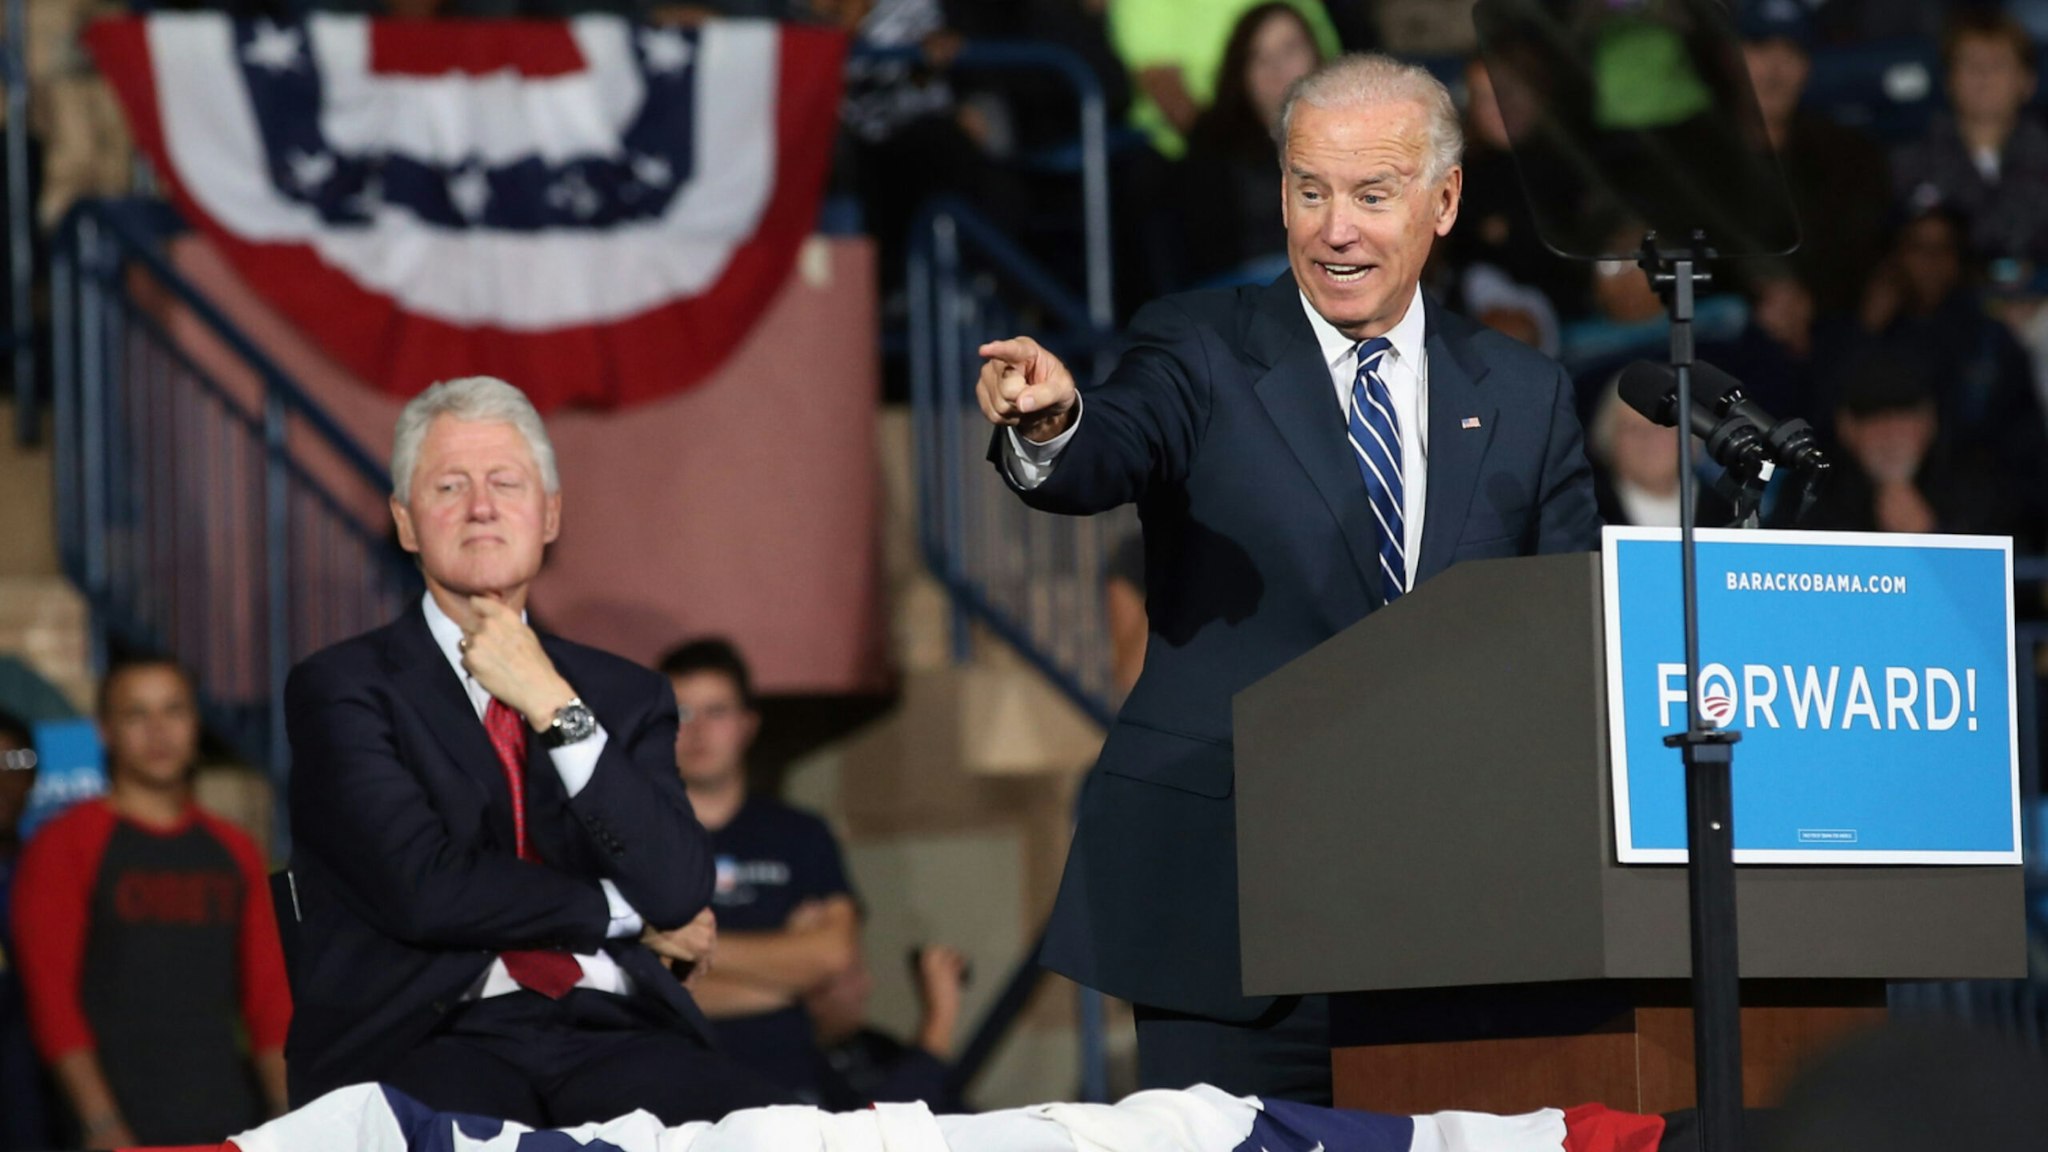 Vice President Joe Biden speaks after former President Bill Clinton during a campaign rally on October 29, 2012 in Youngstown, Ohio.